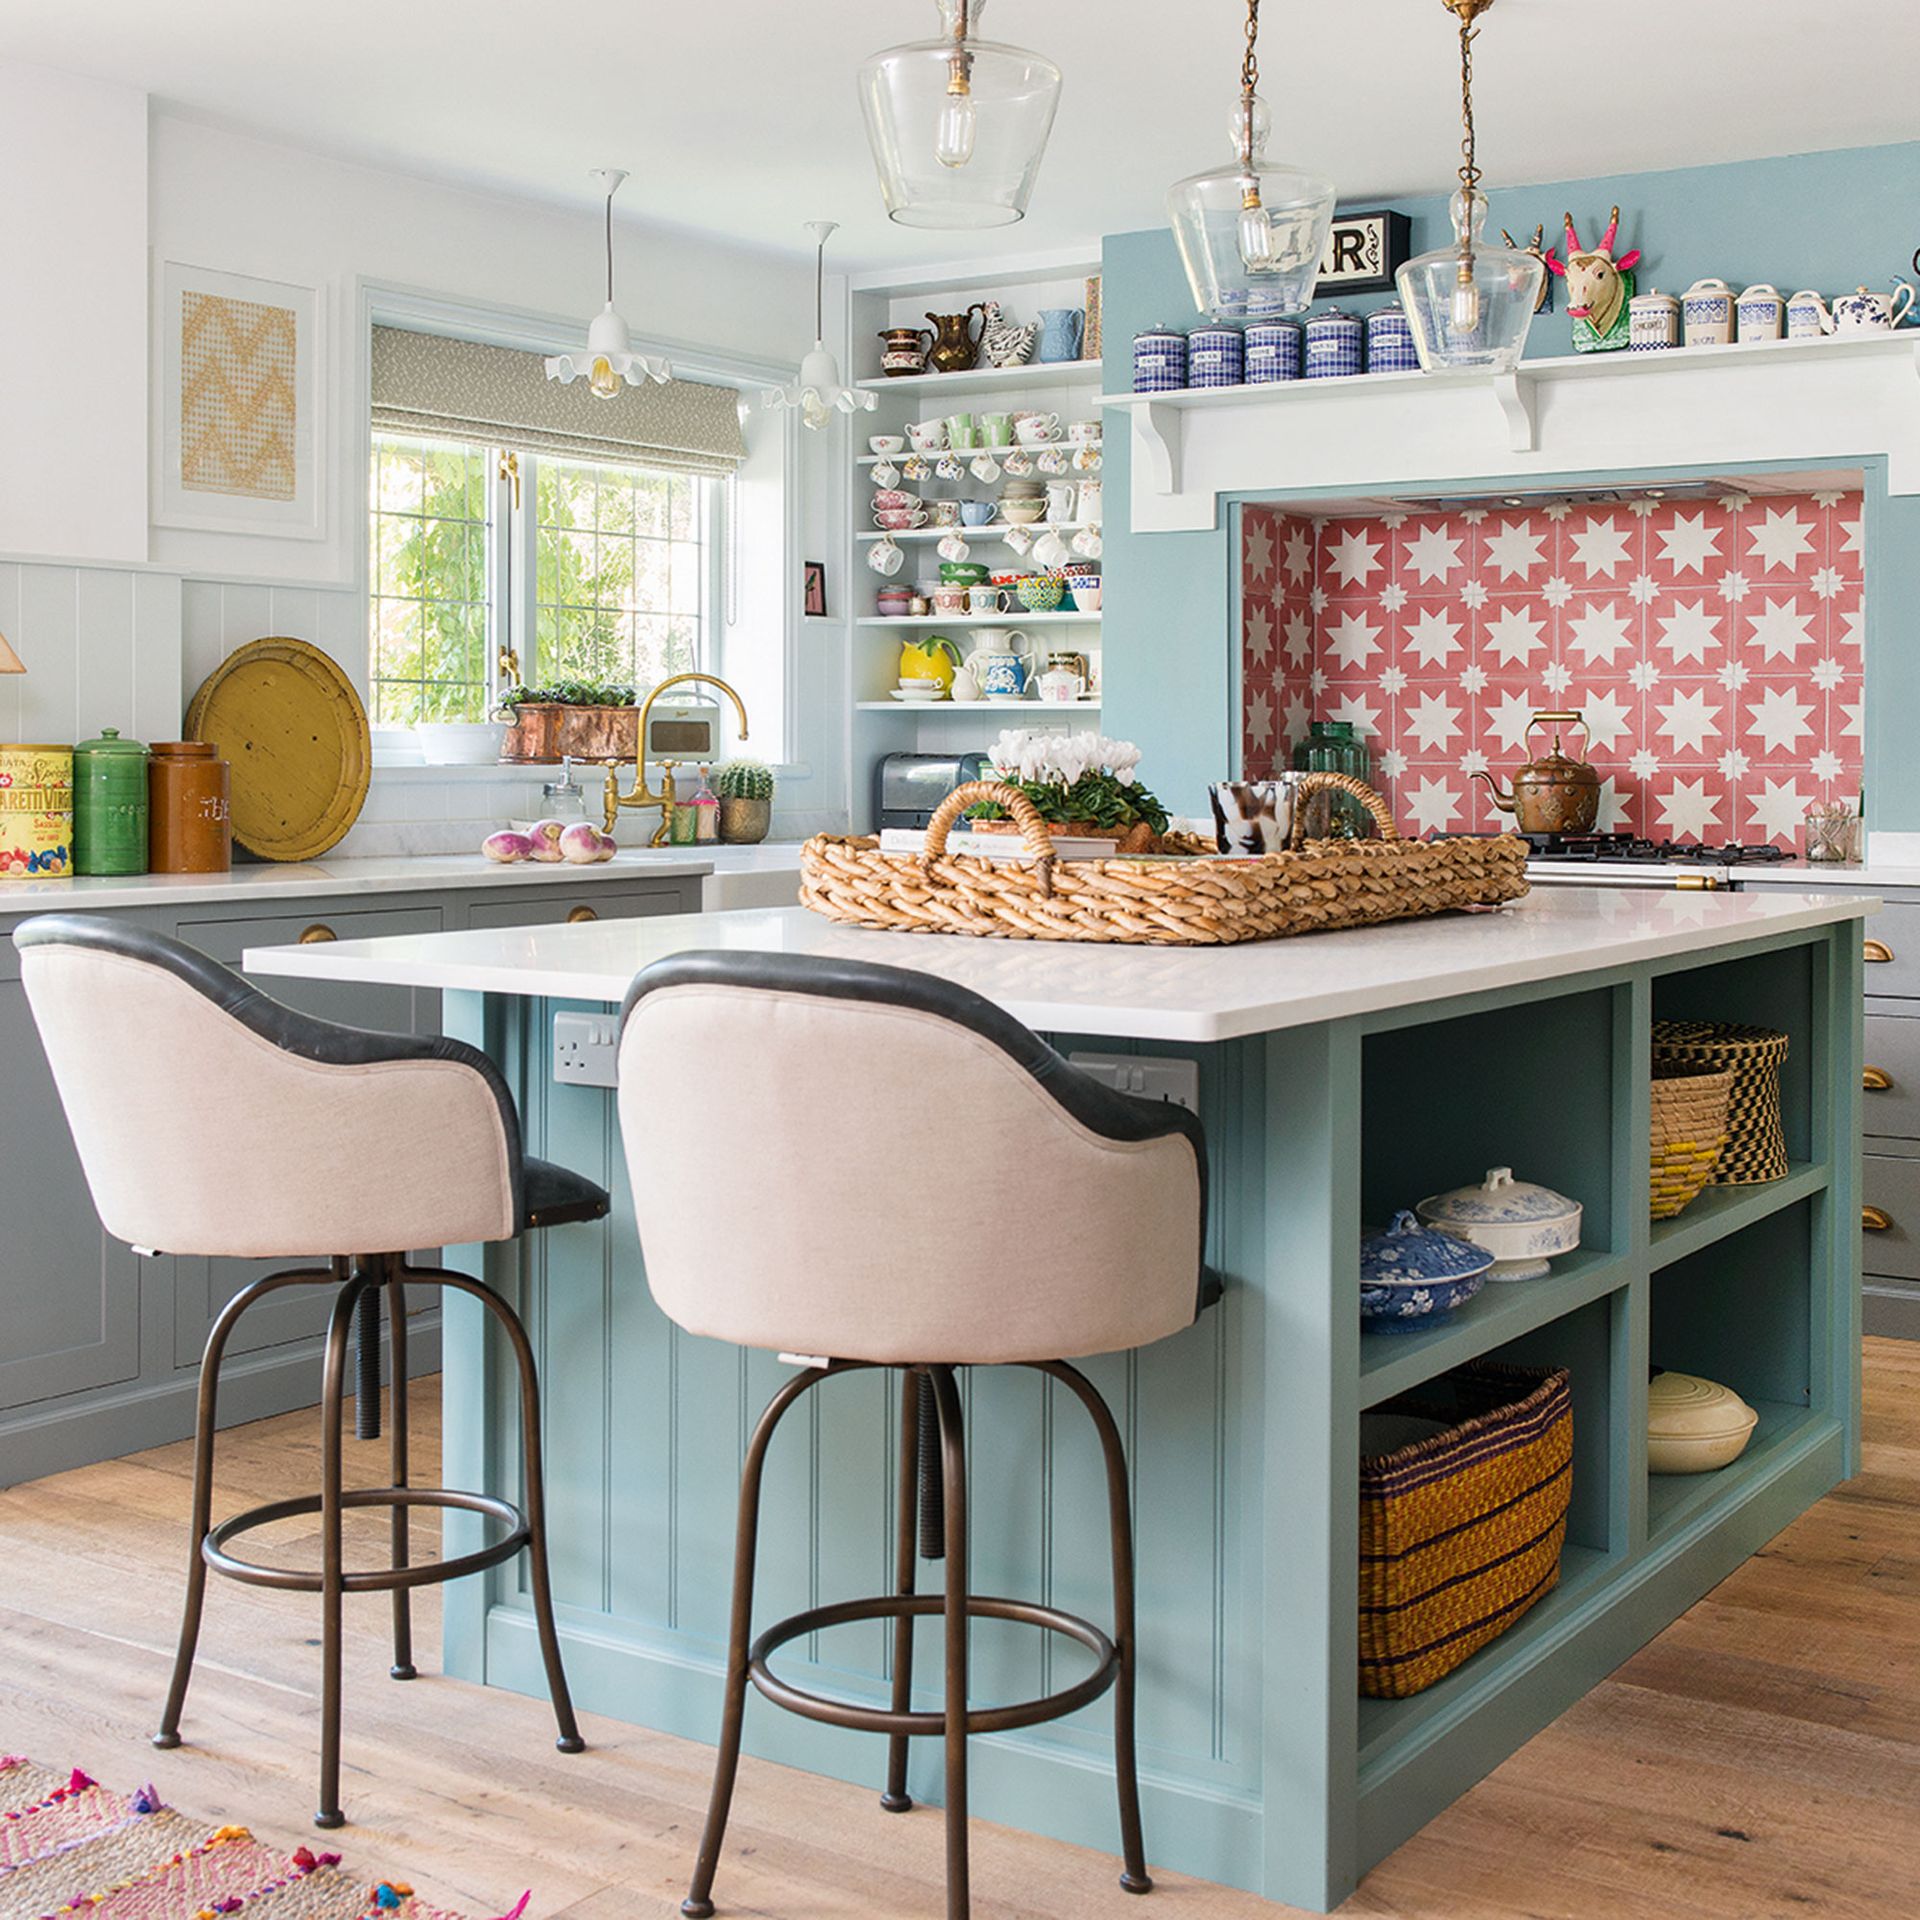 <p>                     The colours of nature are intrinsically linked with country kitchen decor. For a modern approach to rural kitchen colour schemes, head to pretty but muted pastels.                   </p>                                      <p>                     'Look to the outside for inspiration in your colour palette - pale blues and greens, calming yellows' suggests Melissa Klink, Creative Director, Harvey Jones. 'Country kitchen ideas usually have pattern play going on and you can add to this with painted cabinetry, shelving, artwork and small decorative items all in various colours to give an overall palette.'                   </p>                                      <p>                     You don't have to stick to just one colour, either. 'Mixing-and-matching colour and finish creates an eclectic lived-in atmosphere needed for a rustic scheme,' points out Graeme from Life Kitchens.                   </p>